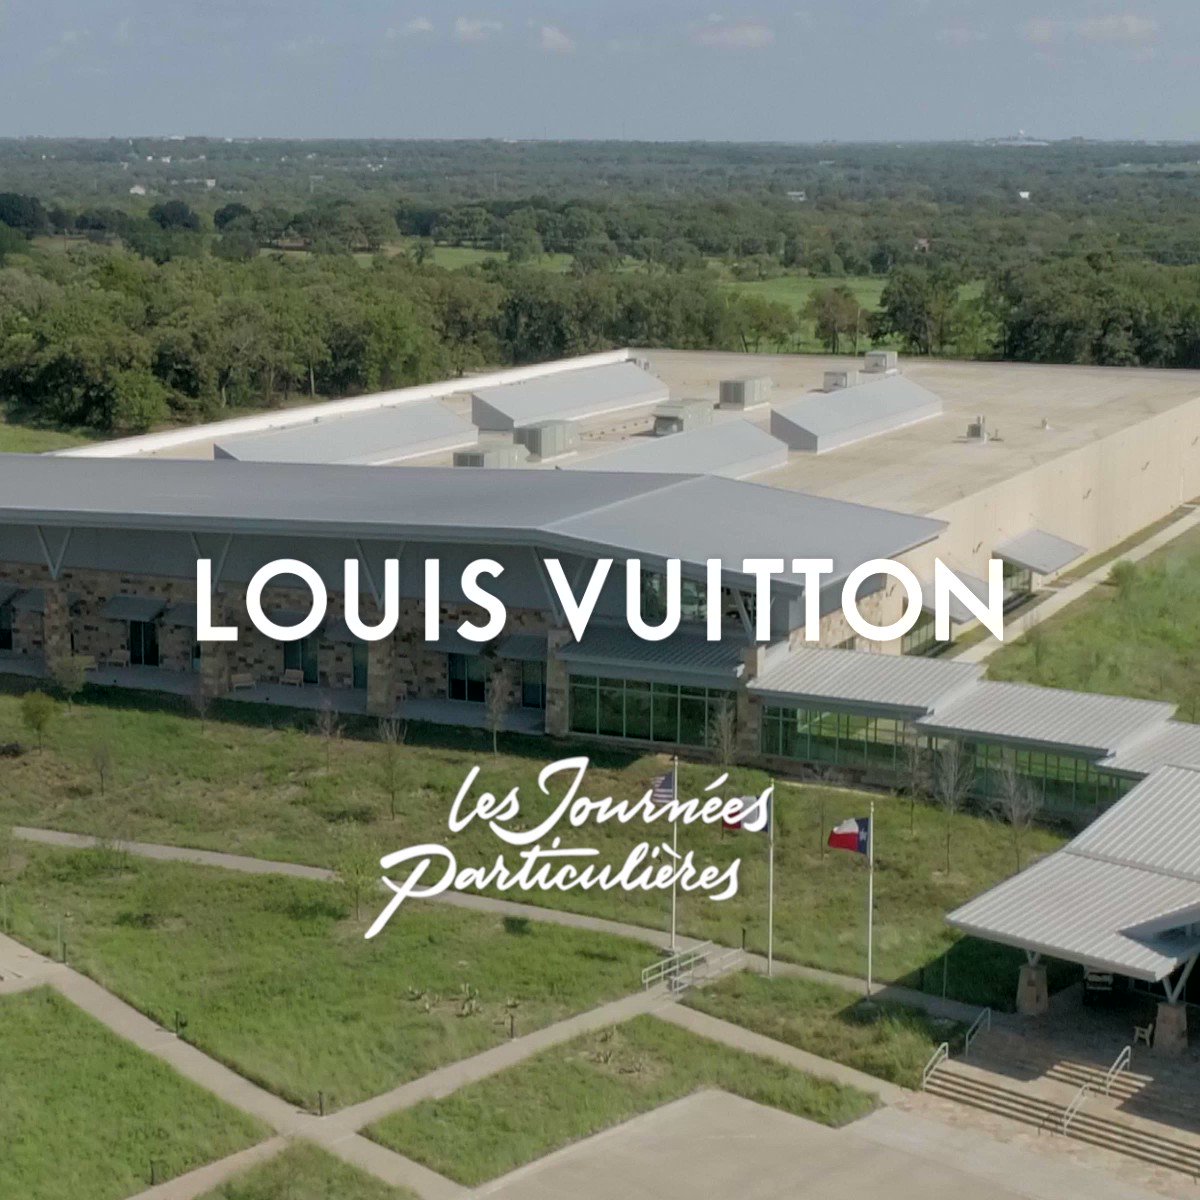 Travel Diary Entry 12: Touring The Louis Vuitton Ranch in #Texas